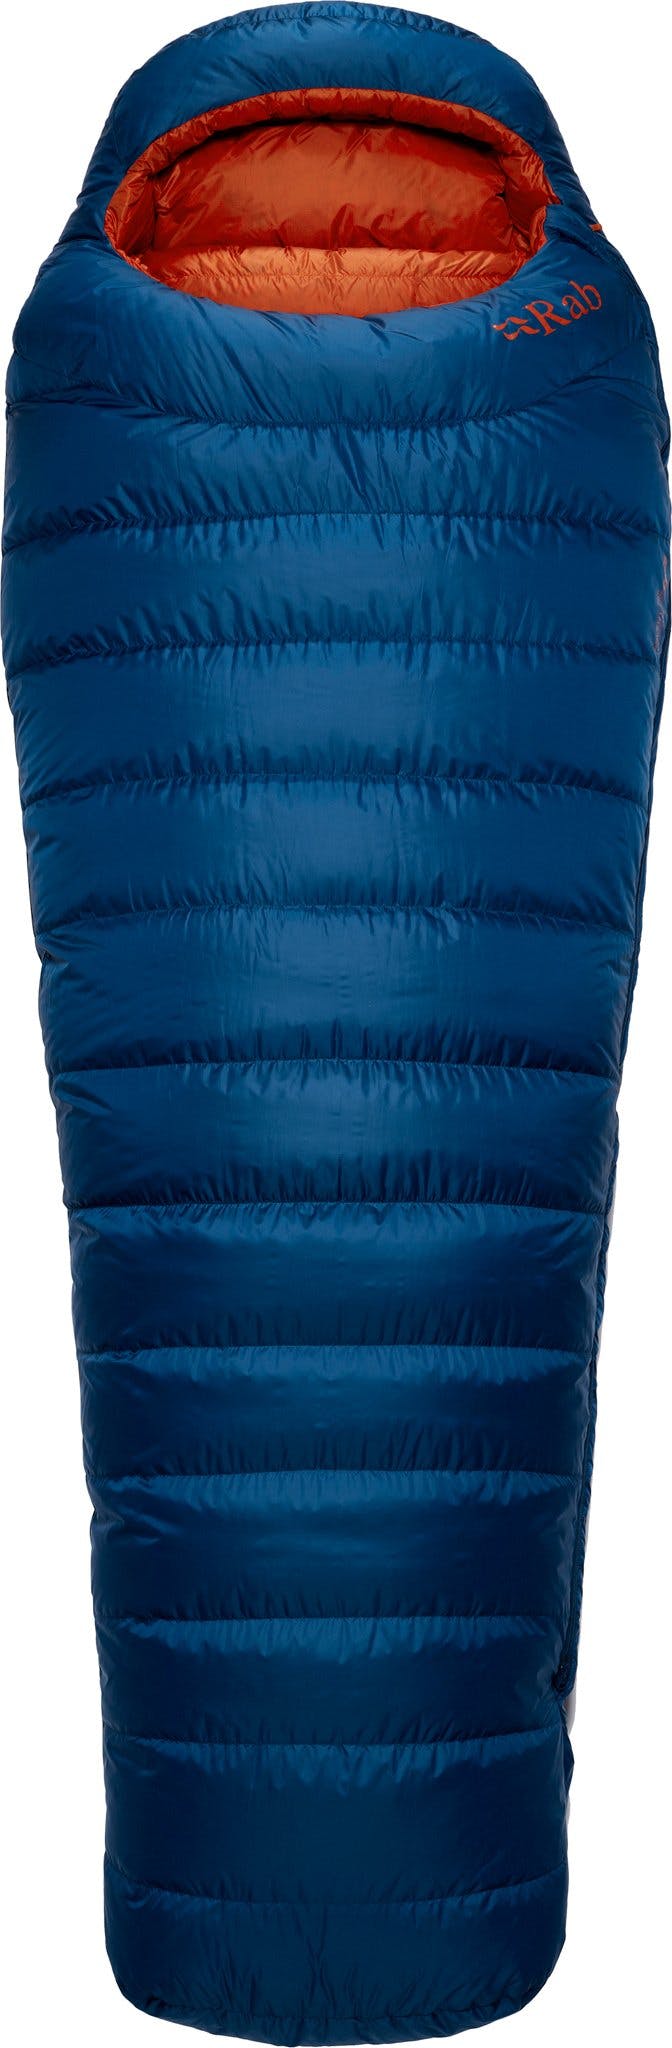 Product image for Ascent 700 Down Sleeping Bag 15°F / -9°C - Long